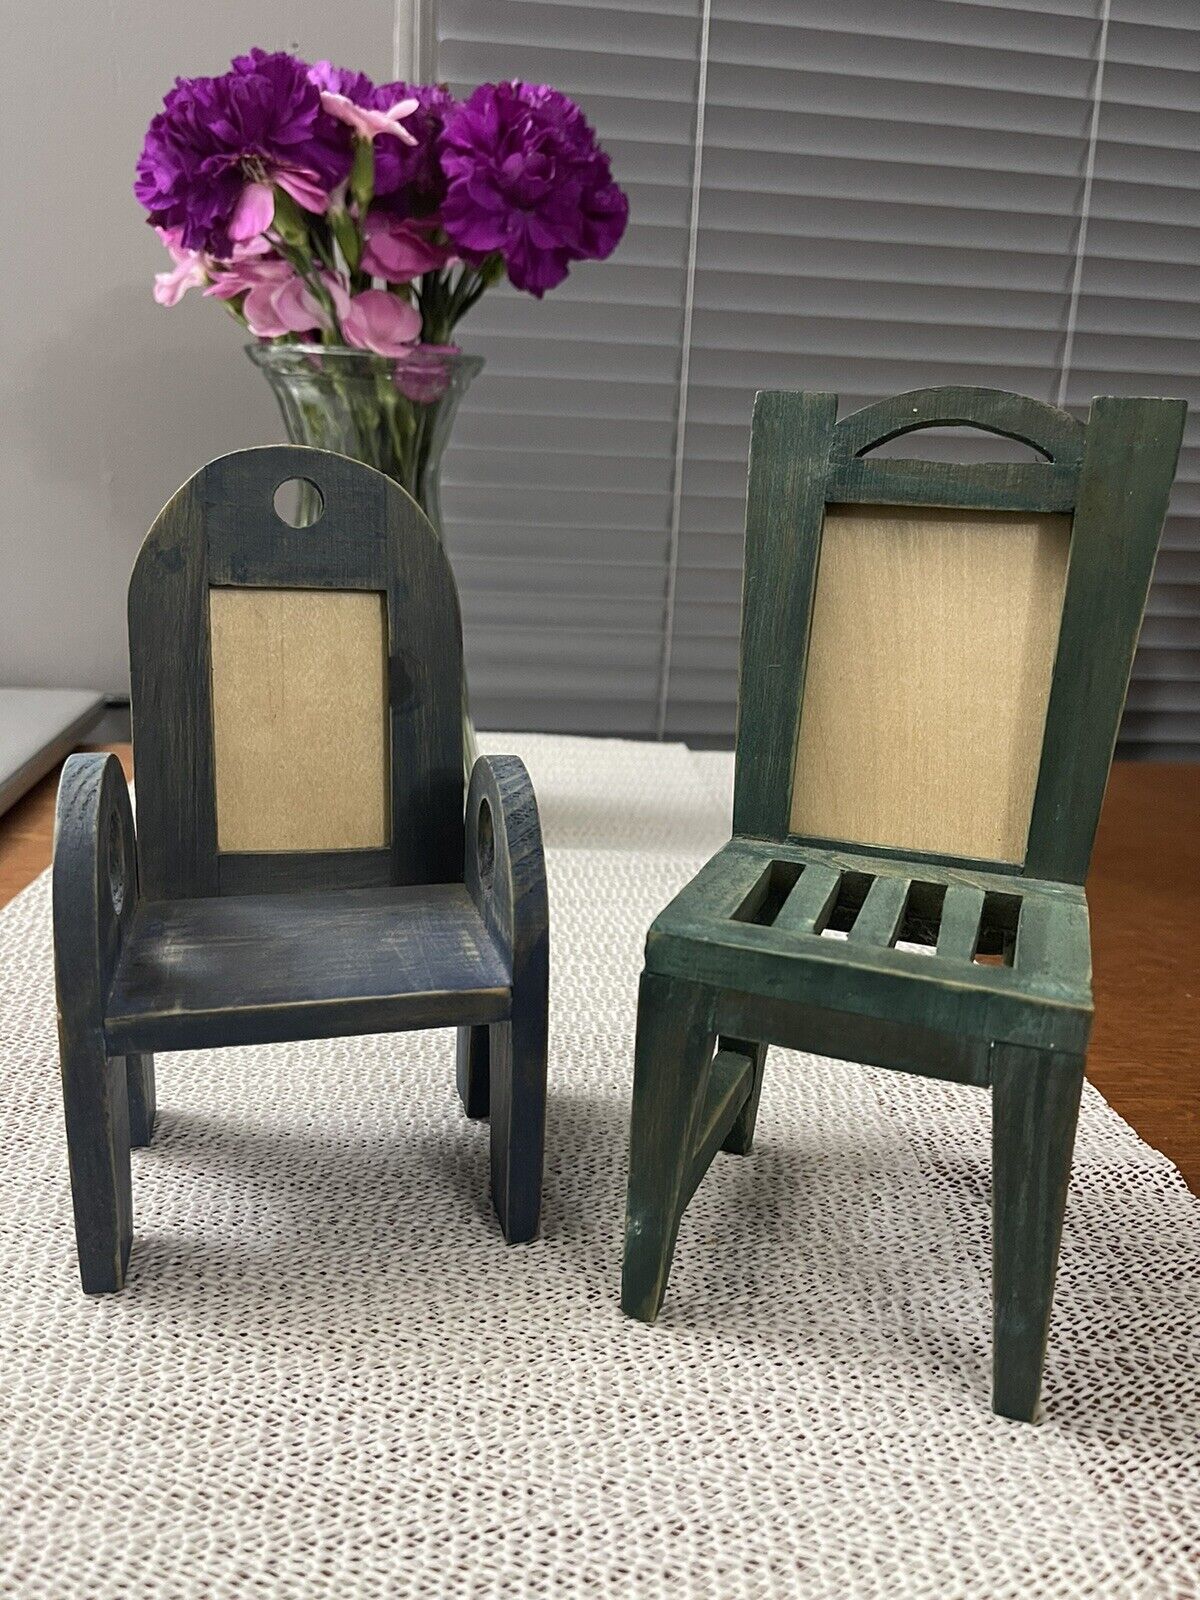 2 Vintage Inter craft Company mini Wooden picture frame chairs,